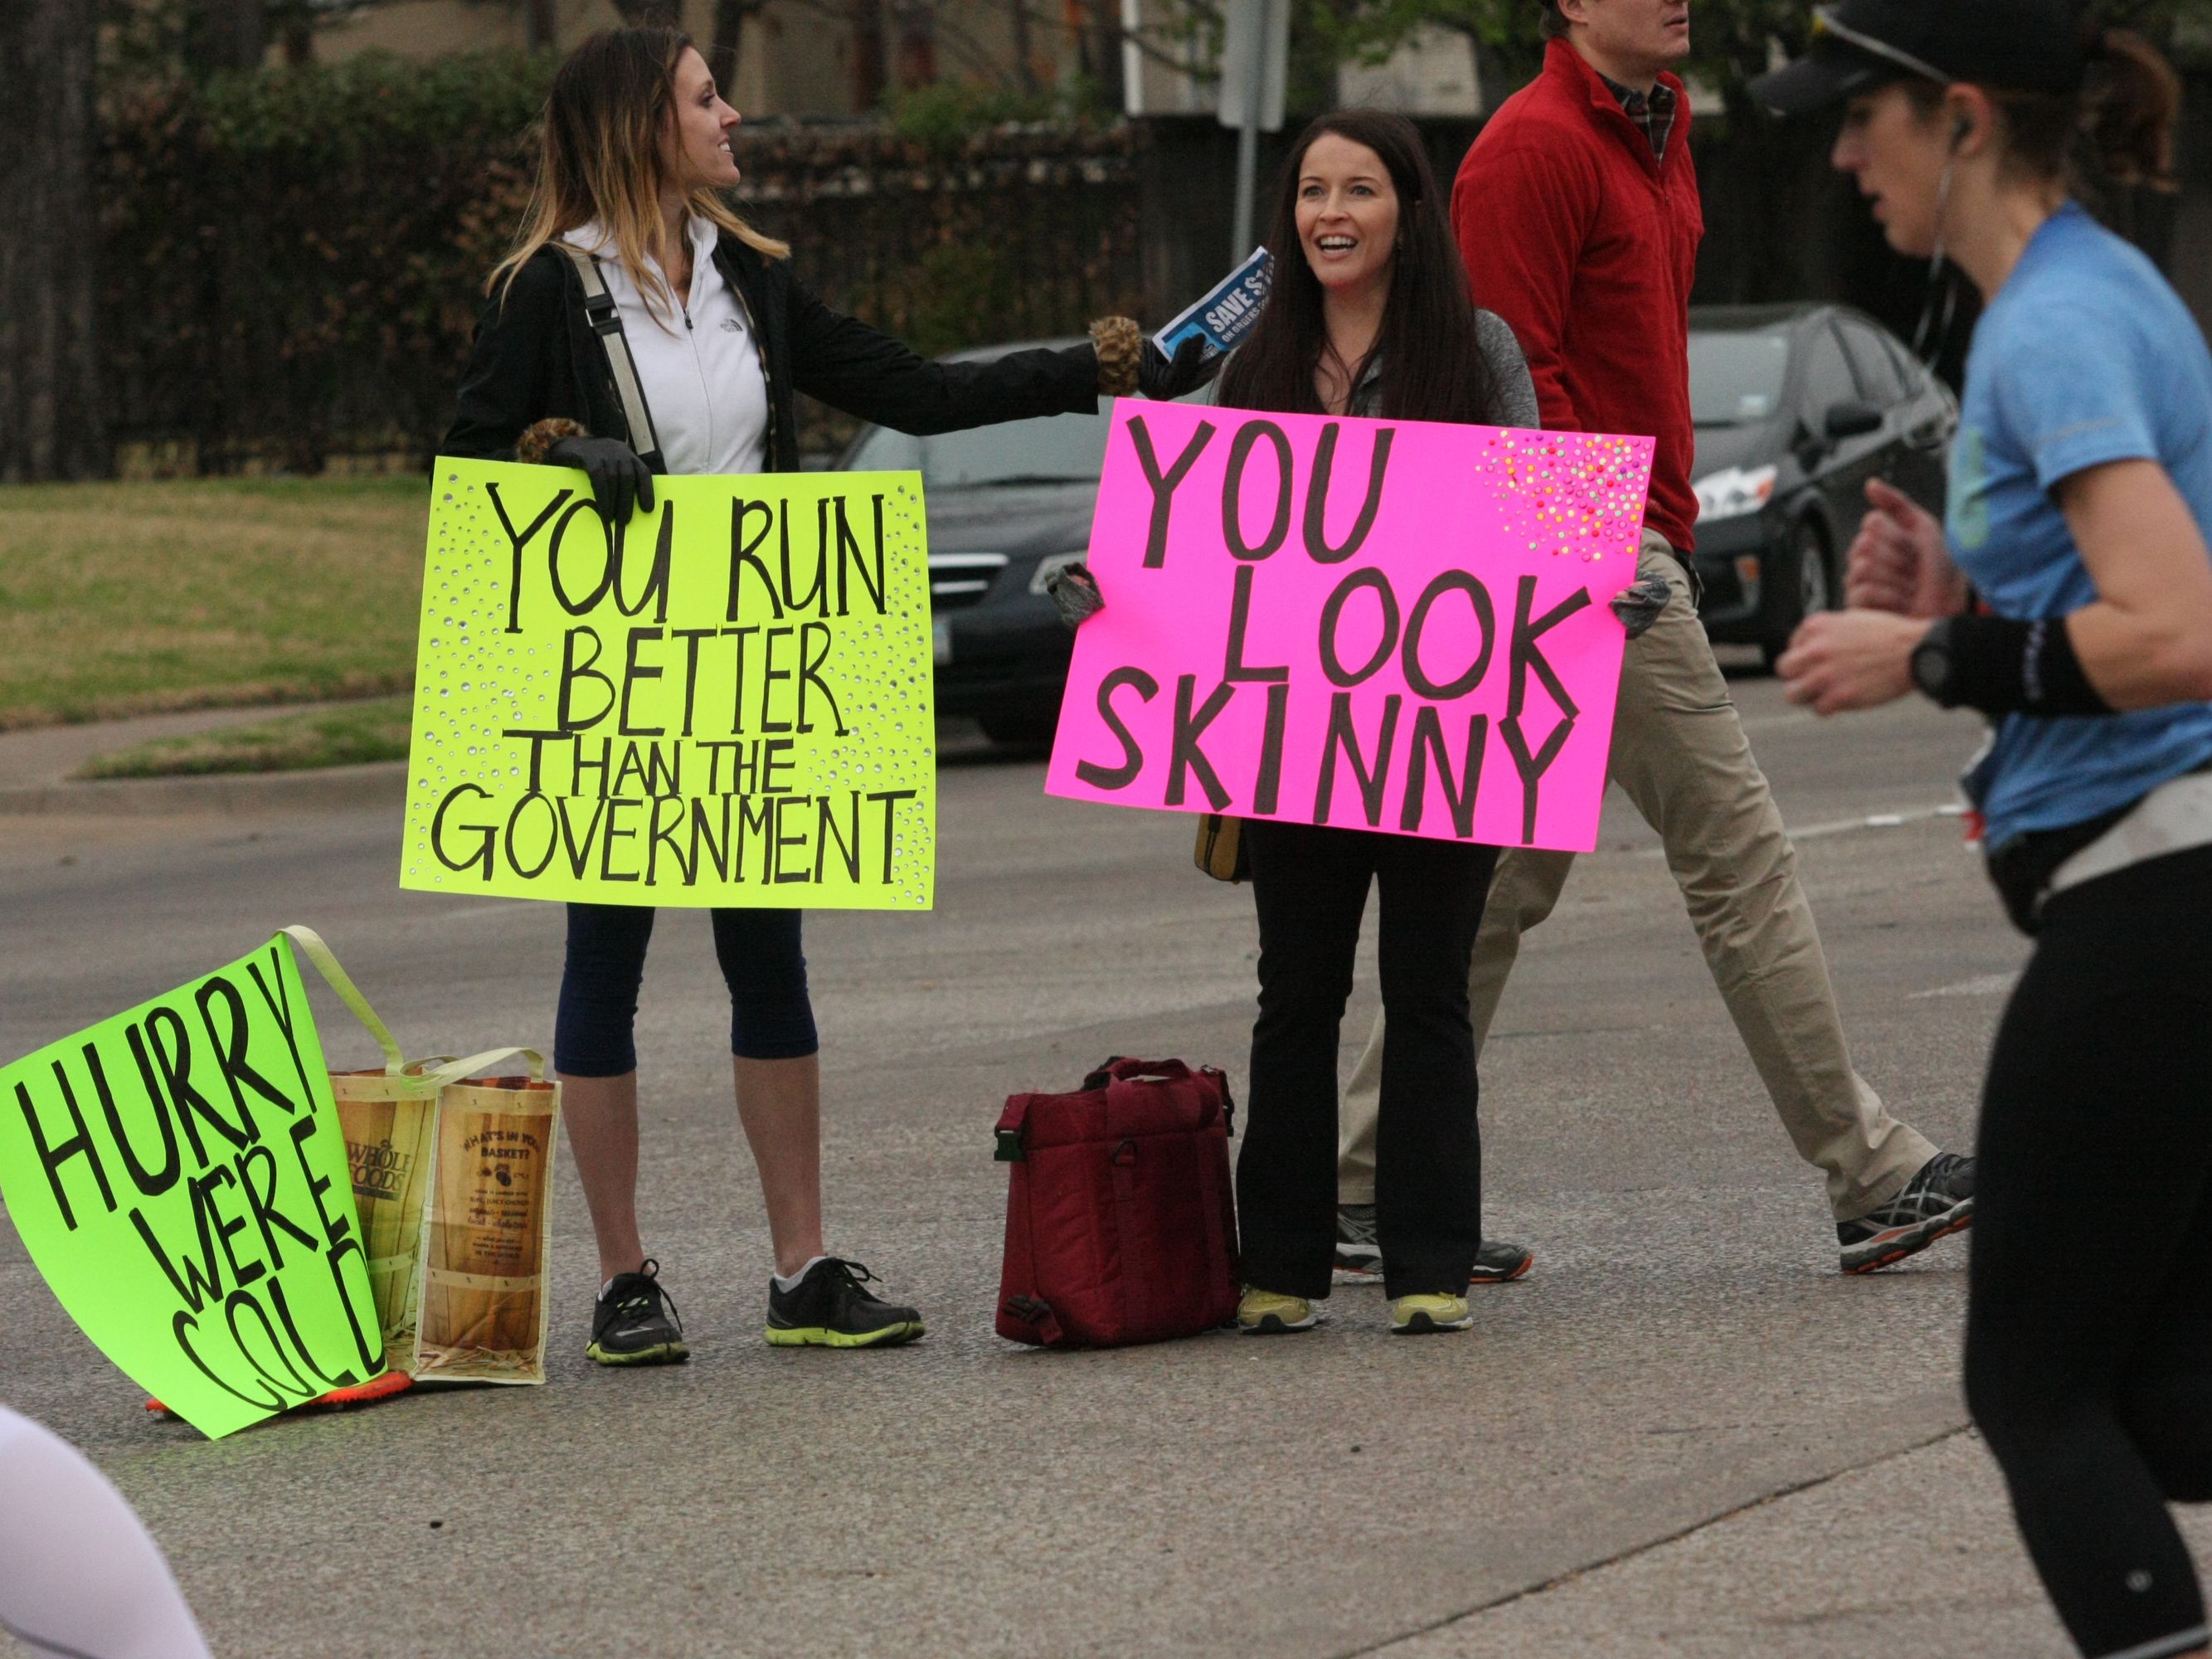 funny marathon signs - Sas You Look You Run Better Government Skinny Than The Hurry Were